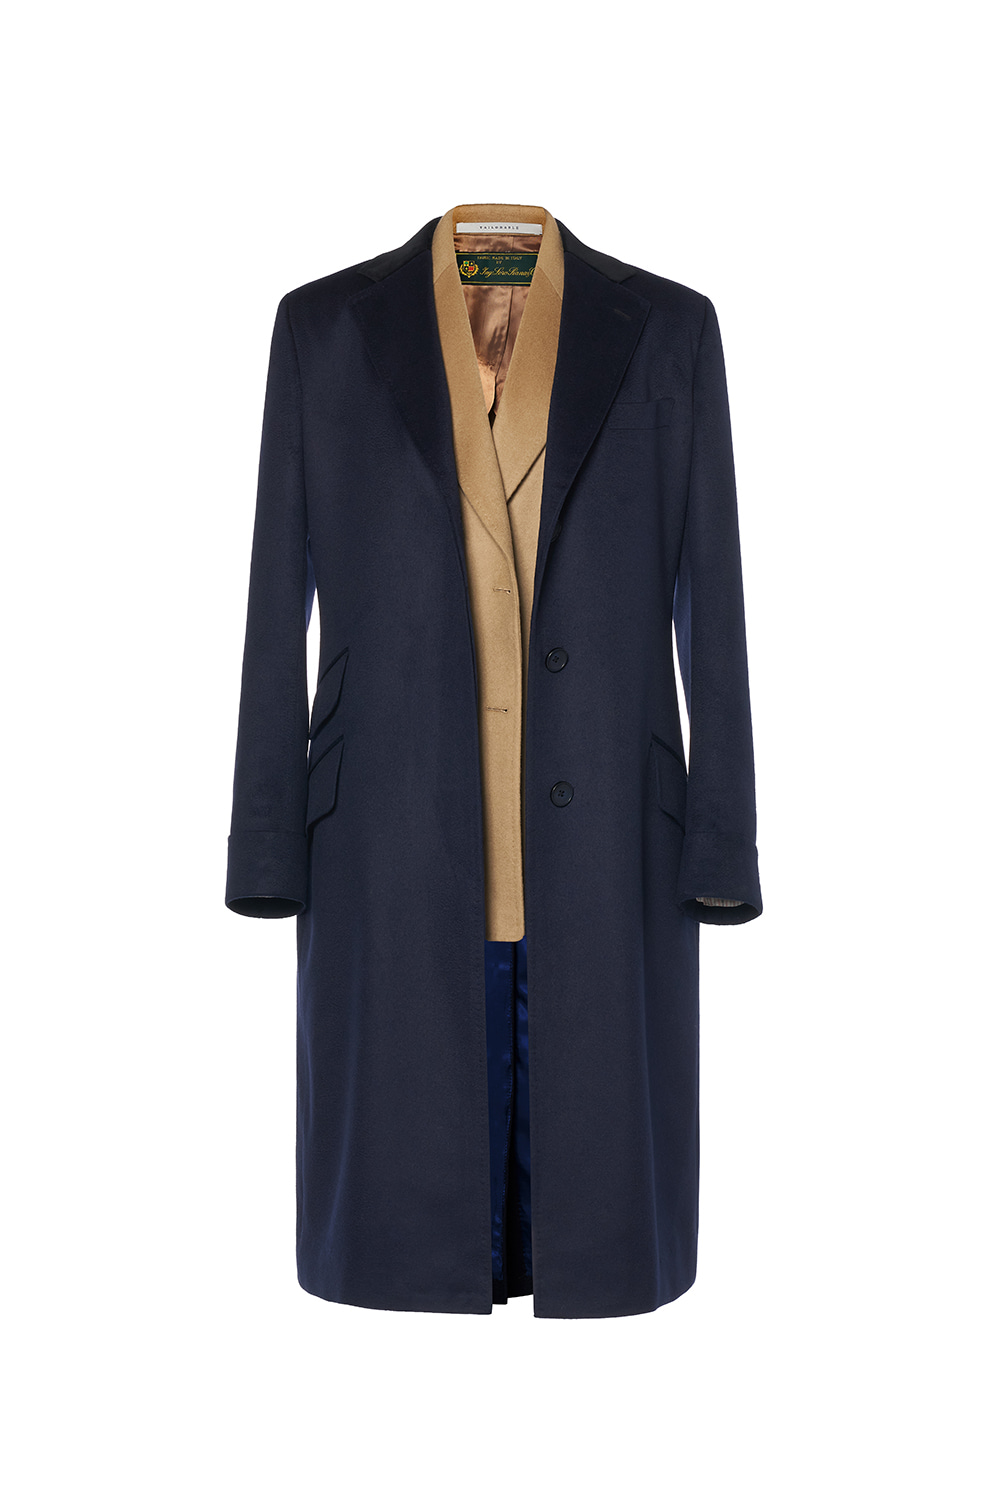 Rondo Navy Pure cashmere winter coat | tailorable